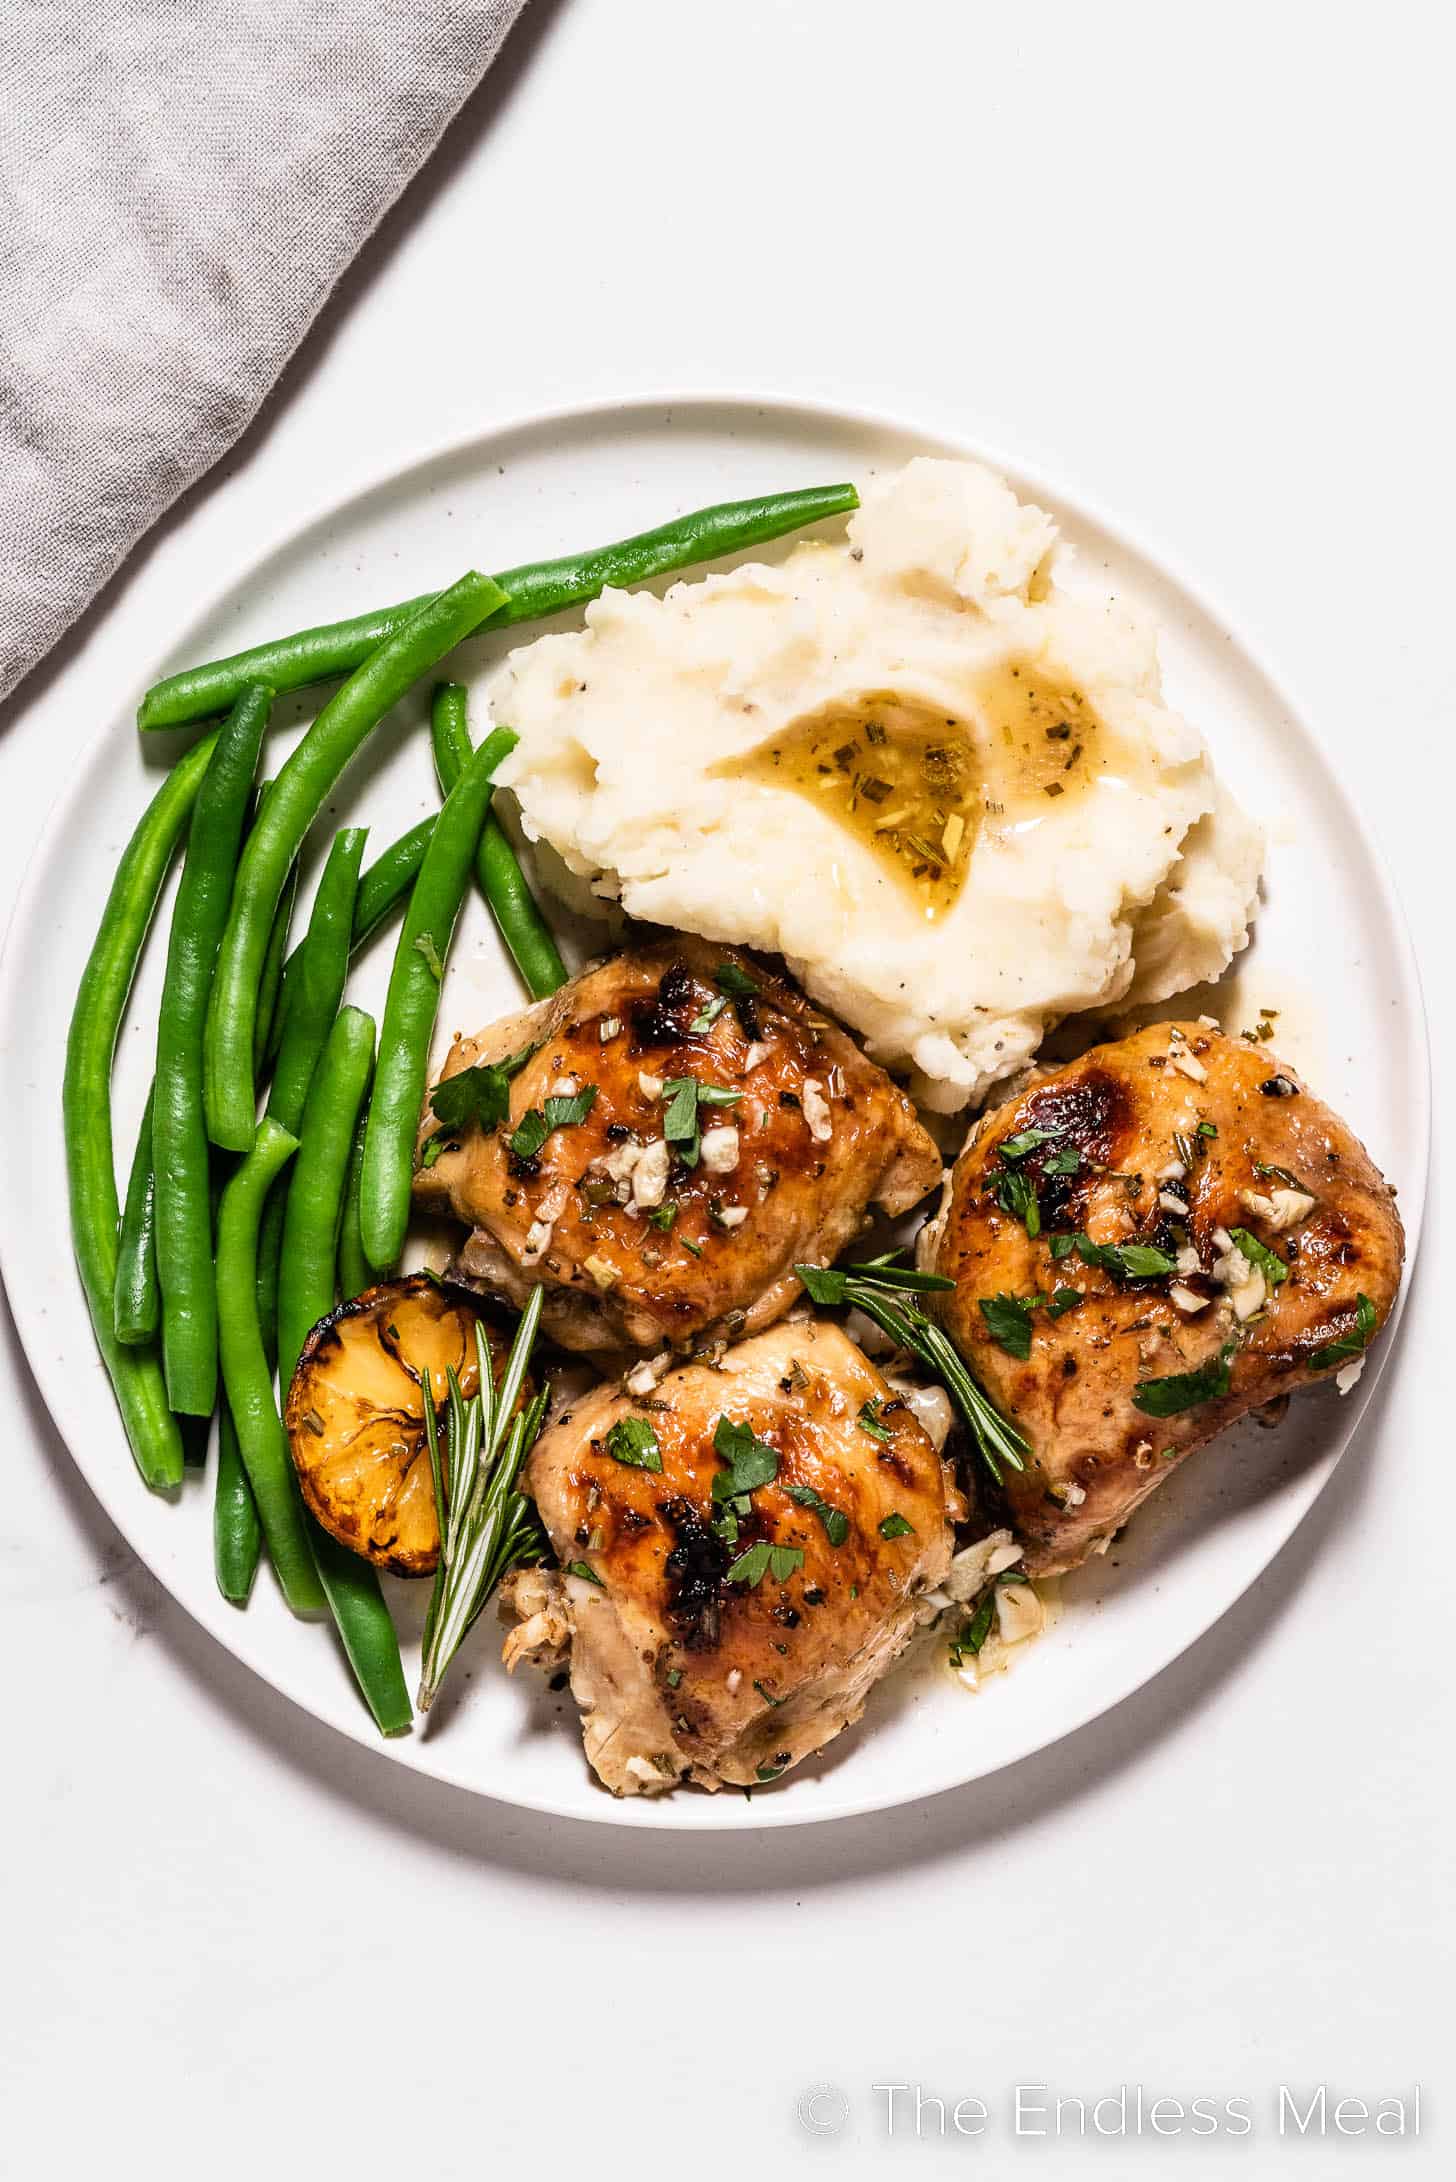 Lemon Rosemary Chicken Thighs on a plate with mashed potatoes and green beans.